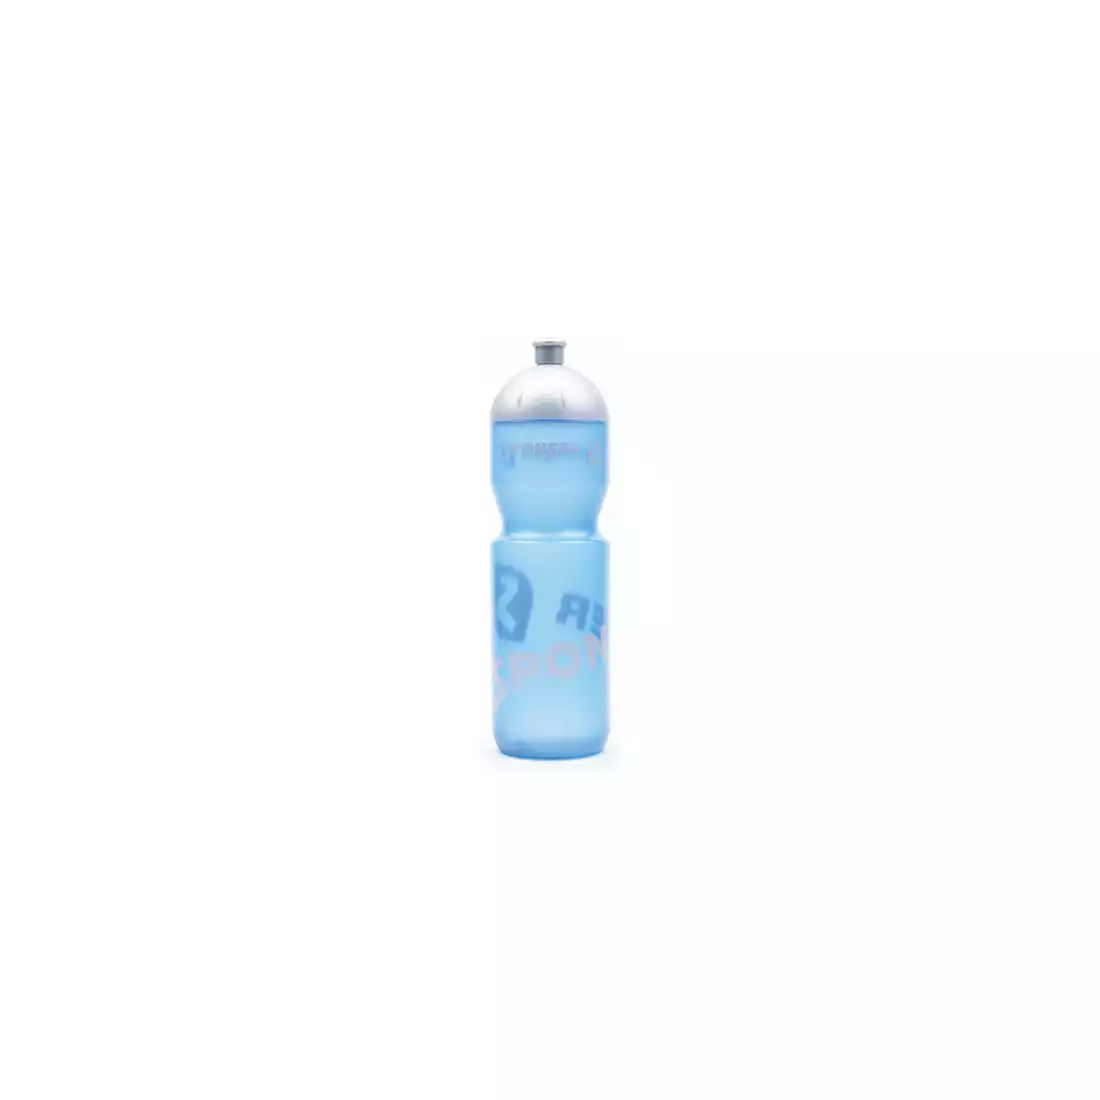 SPONSER NETTO bicycle water bottle 750 ml, transparent blue/silver